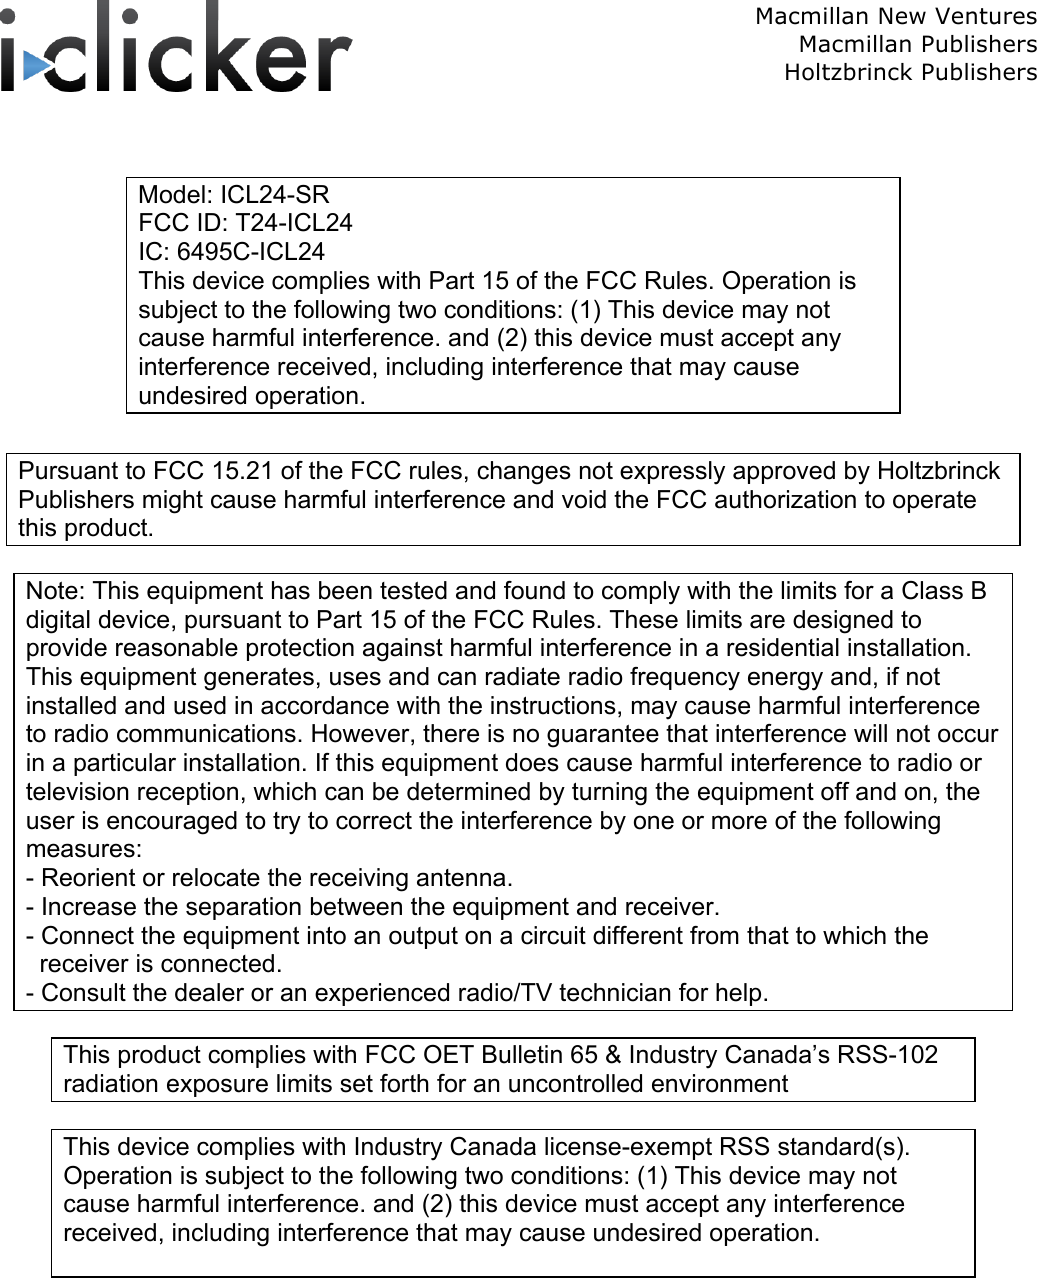  Macmillan New Ventures Macmillan Publishers Holtzbrinck Publishers    Model: ICL24-SR FCC ID: T24-ICL24 IC: 6495C-ICL24 This device complies with Part 15 of the FCC Rules. Operation is subject to the following two conditions: (1) This device may not cause harmful interference. and (2) this device must accept any interference received, including interference that may cause undesired operation.  Pursuant to FCC 15.21 of the FCC rules, changes not expressly approved by Holtzbrinck Publishers might cause harmful interference and void the FCC authorization to operate this product.  Note: This equipment has been tested and found to comply with the limits for a Class B digital device, pursuant to Part 15 of the FCC Rules. These limits are designed to provide reasonable protection against harmful interference in a residential installation. This equipment generates, uses and can radiate radio frequency energy and, if not installed and used in accordance with the instructions, may cause harmful interference to radio communications. However, there is no guarantee that interference will not occur in a particular installation. If this equipment does cause harmful interference to radio or television reception, which can be determined by turning the equipment off and on, the user is encouraged to try to correct the interference by one or more of the following measures: - Reorient or relocate the receiving antenna. - Increase the separation between the equipment and receiver. - Connect the equipment into an output on a circuit different from that to which the   receiver is connected. - Consult the dealer or an experienced radio/TV technician for help.  This product complies with FCC OET Bulletin 65 &amp; Industry Canada’s RSS-102 radiation exposure limits set forth for an uncontrolled environment  This device complies with Industry Canada license-exempt RSS standard(s). Operation is subject to the following two conditions: (1) This device may not cause harmful interference. and (2) this device must accept any interference received, including interference that may cause undesired operation.  